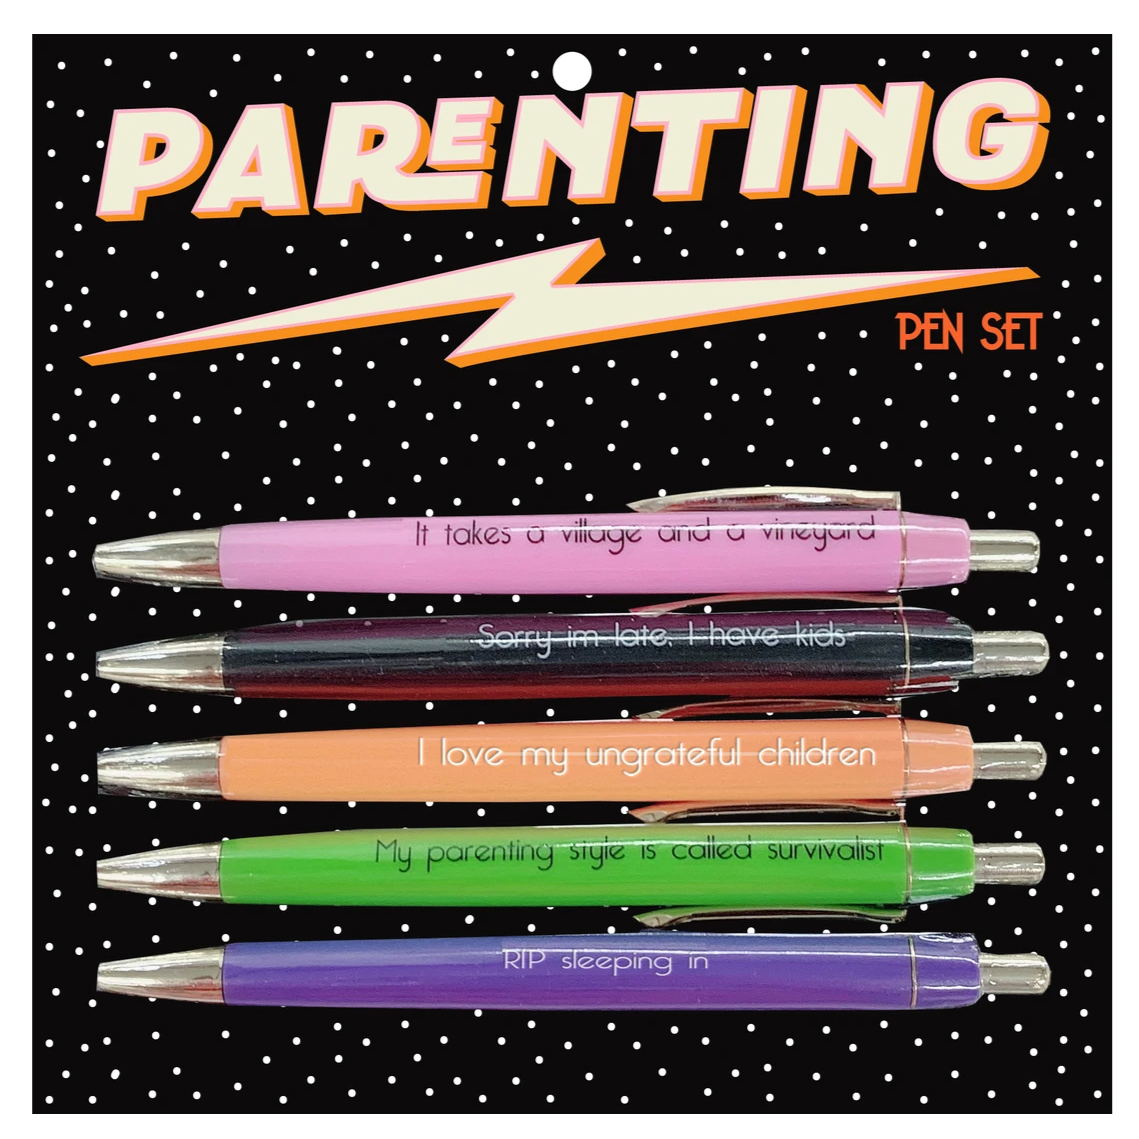 PARENTING PEN SET (FUNNY, WINE, WINERY, GIFT, UNIQUE)